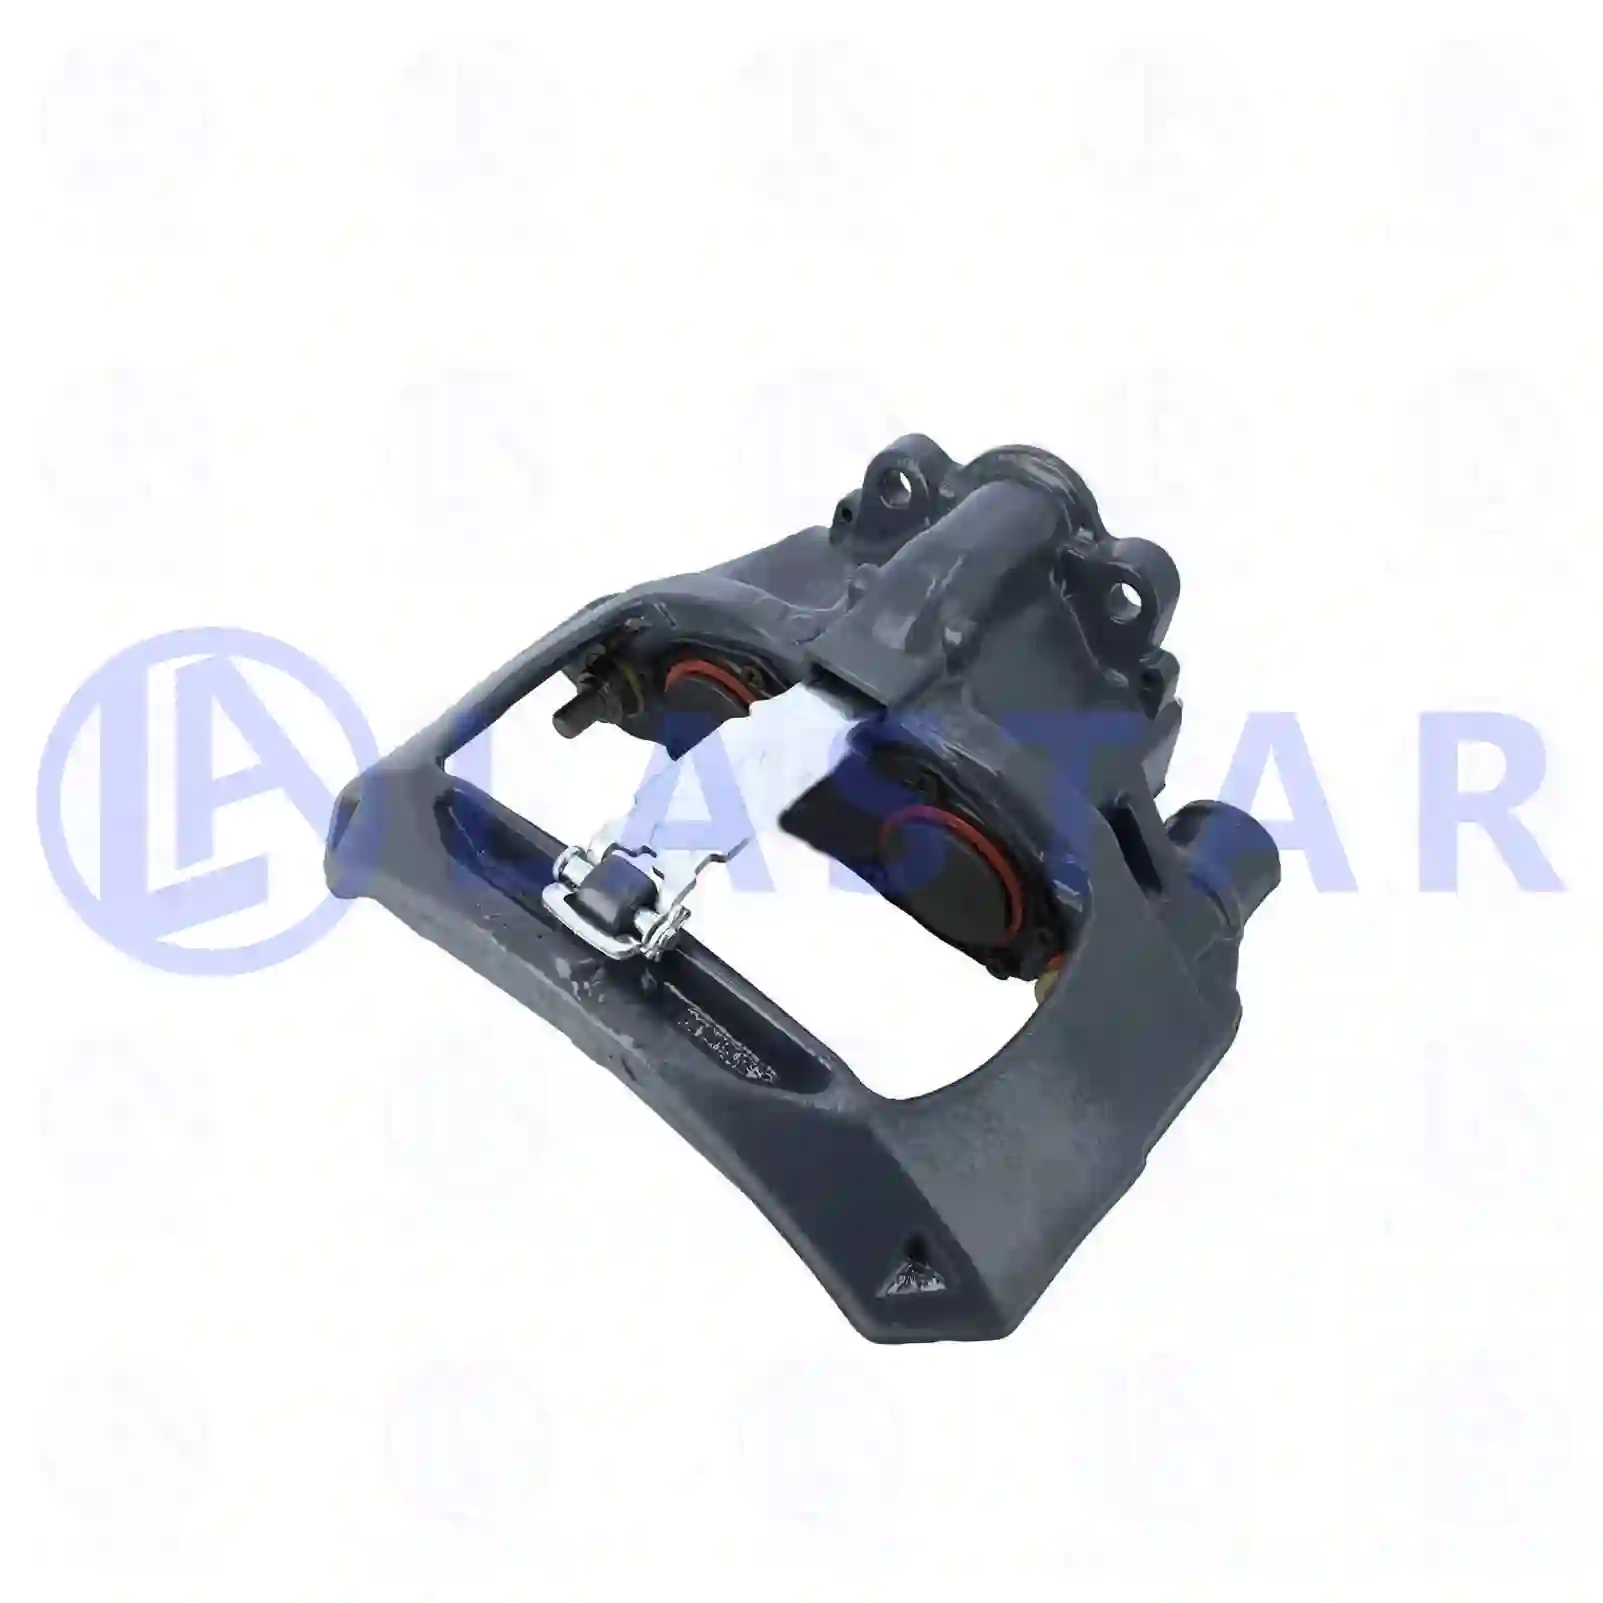 Brake caliper, right, reman. / without old core, 77715080, 24205083, 3080002 ||  77715080 Lastar Spare Part | Truck Spare Parts, Auotomotive Spare Parts Brake caliper, right, reman. / without old core, 77715080, 24205083, 3080002 ||  77715080 Lastar Spare Part | Truck Spare Parts, Auotomotive Spare Parts